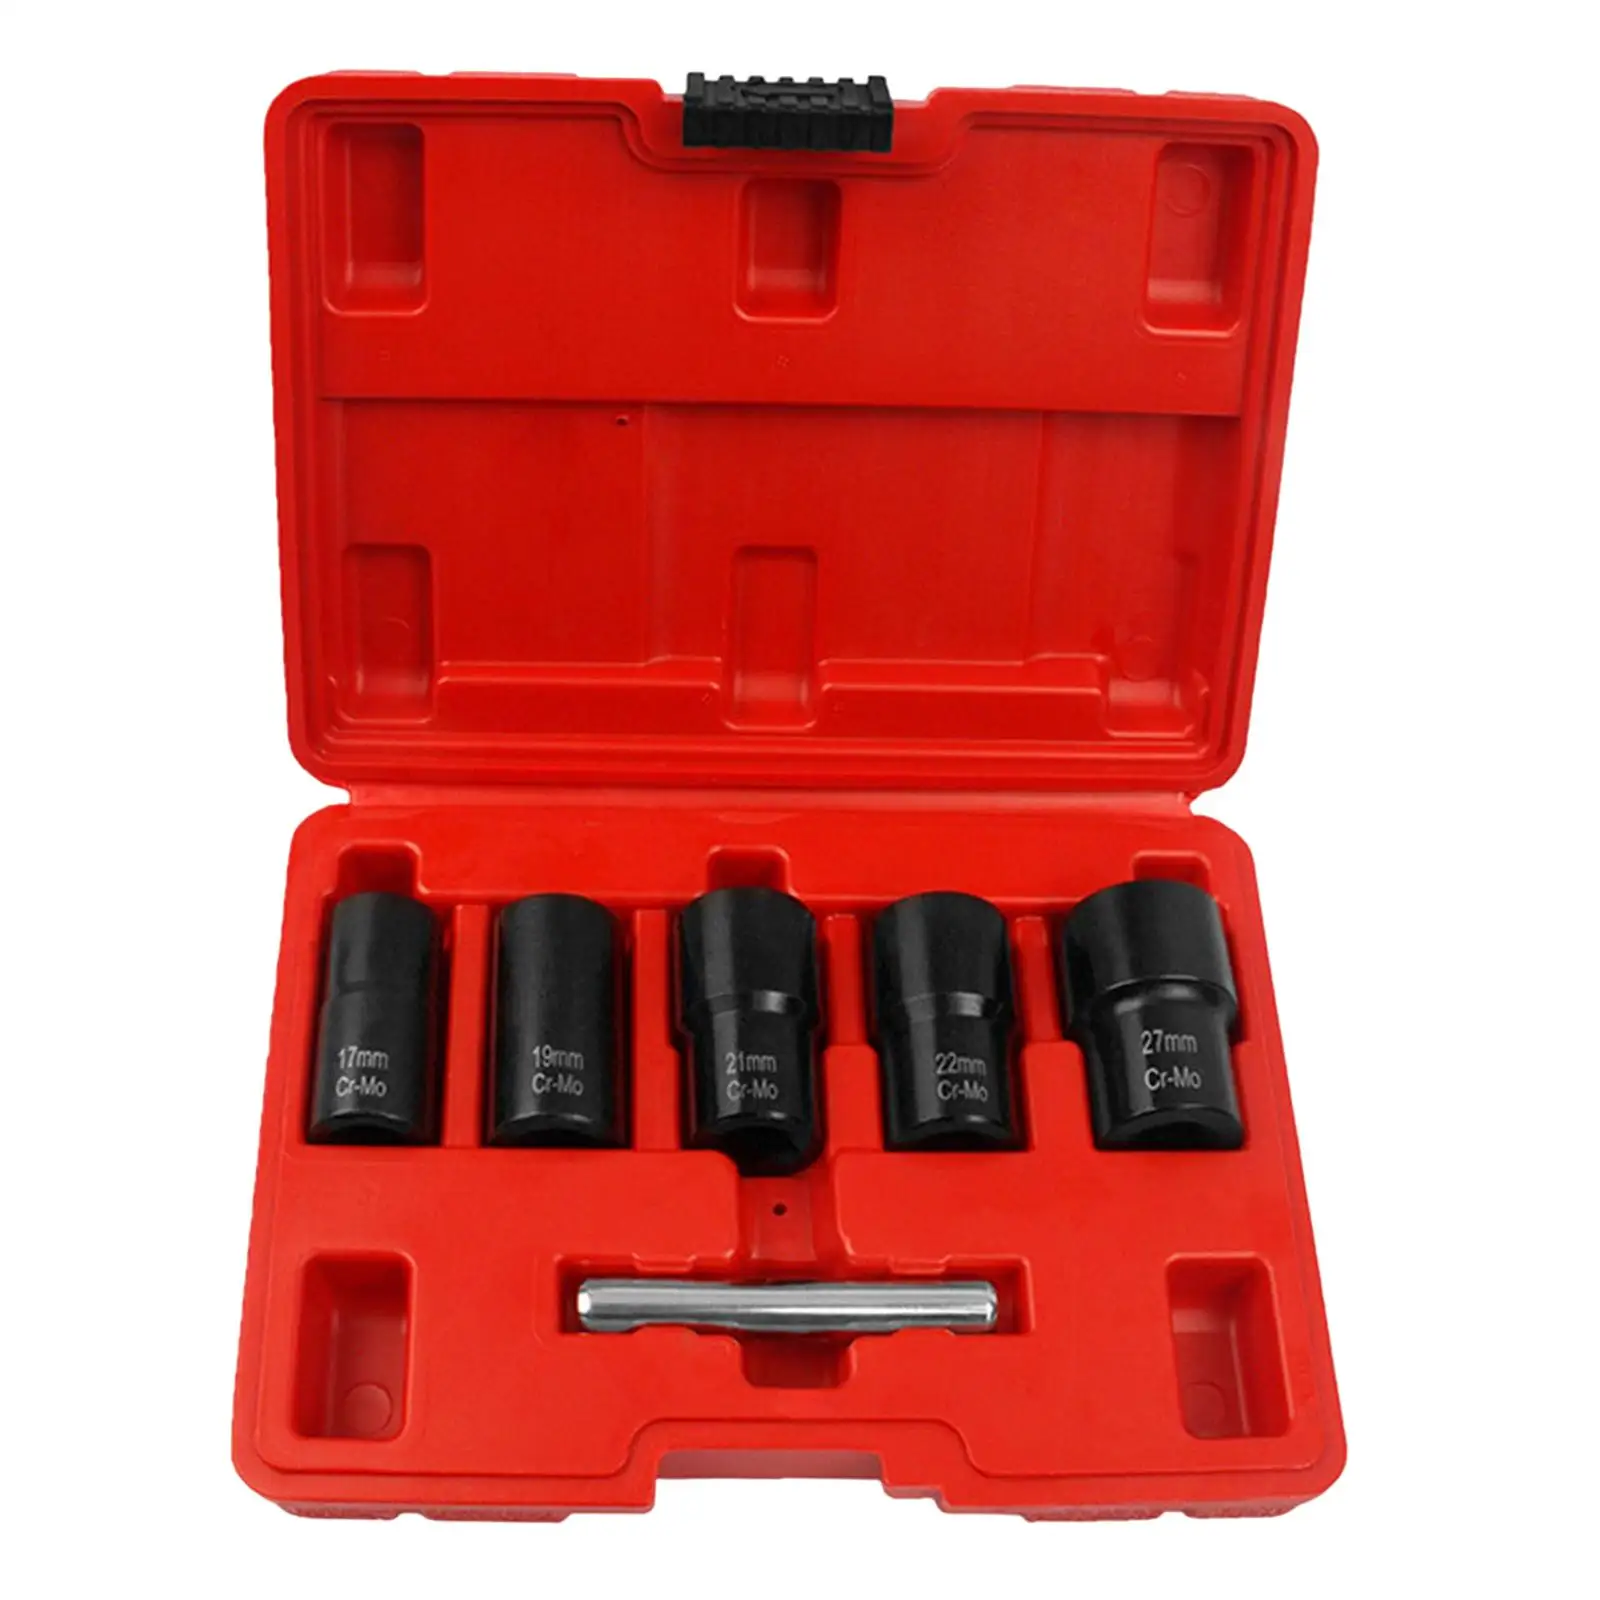 6x Socket Wrench Set with Storage Case Broken Screw Extractor Remover Set 6 Point for 1/2